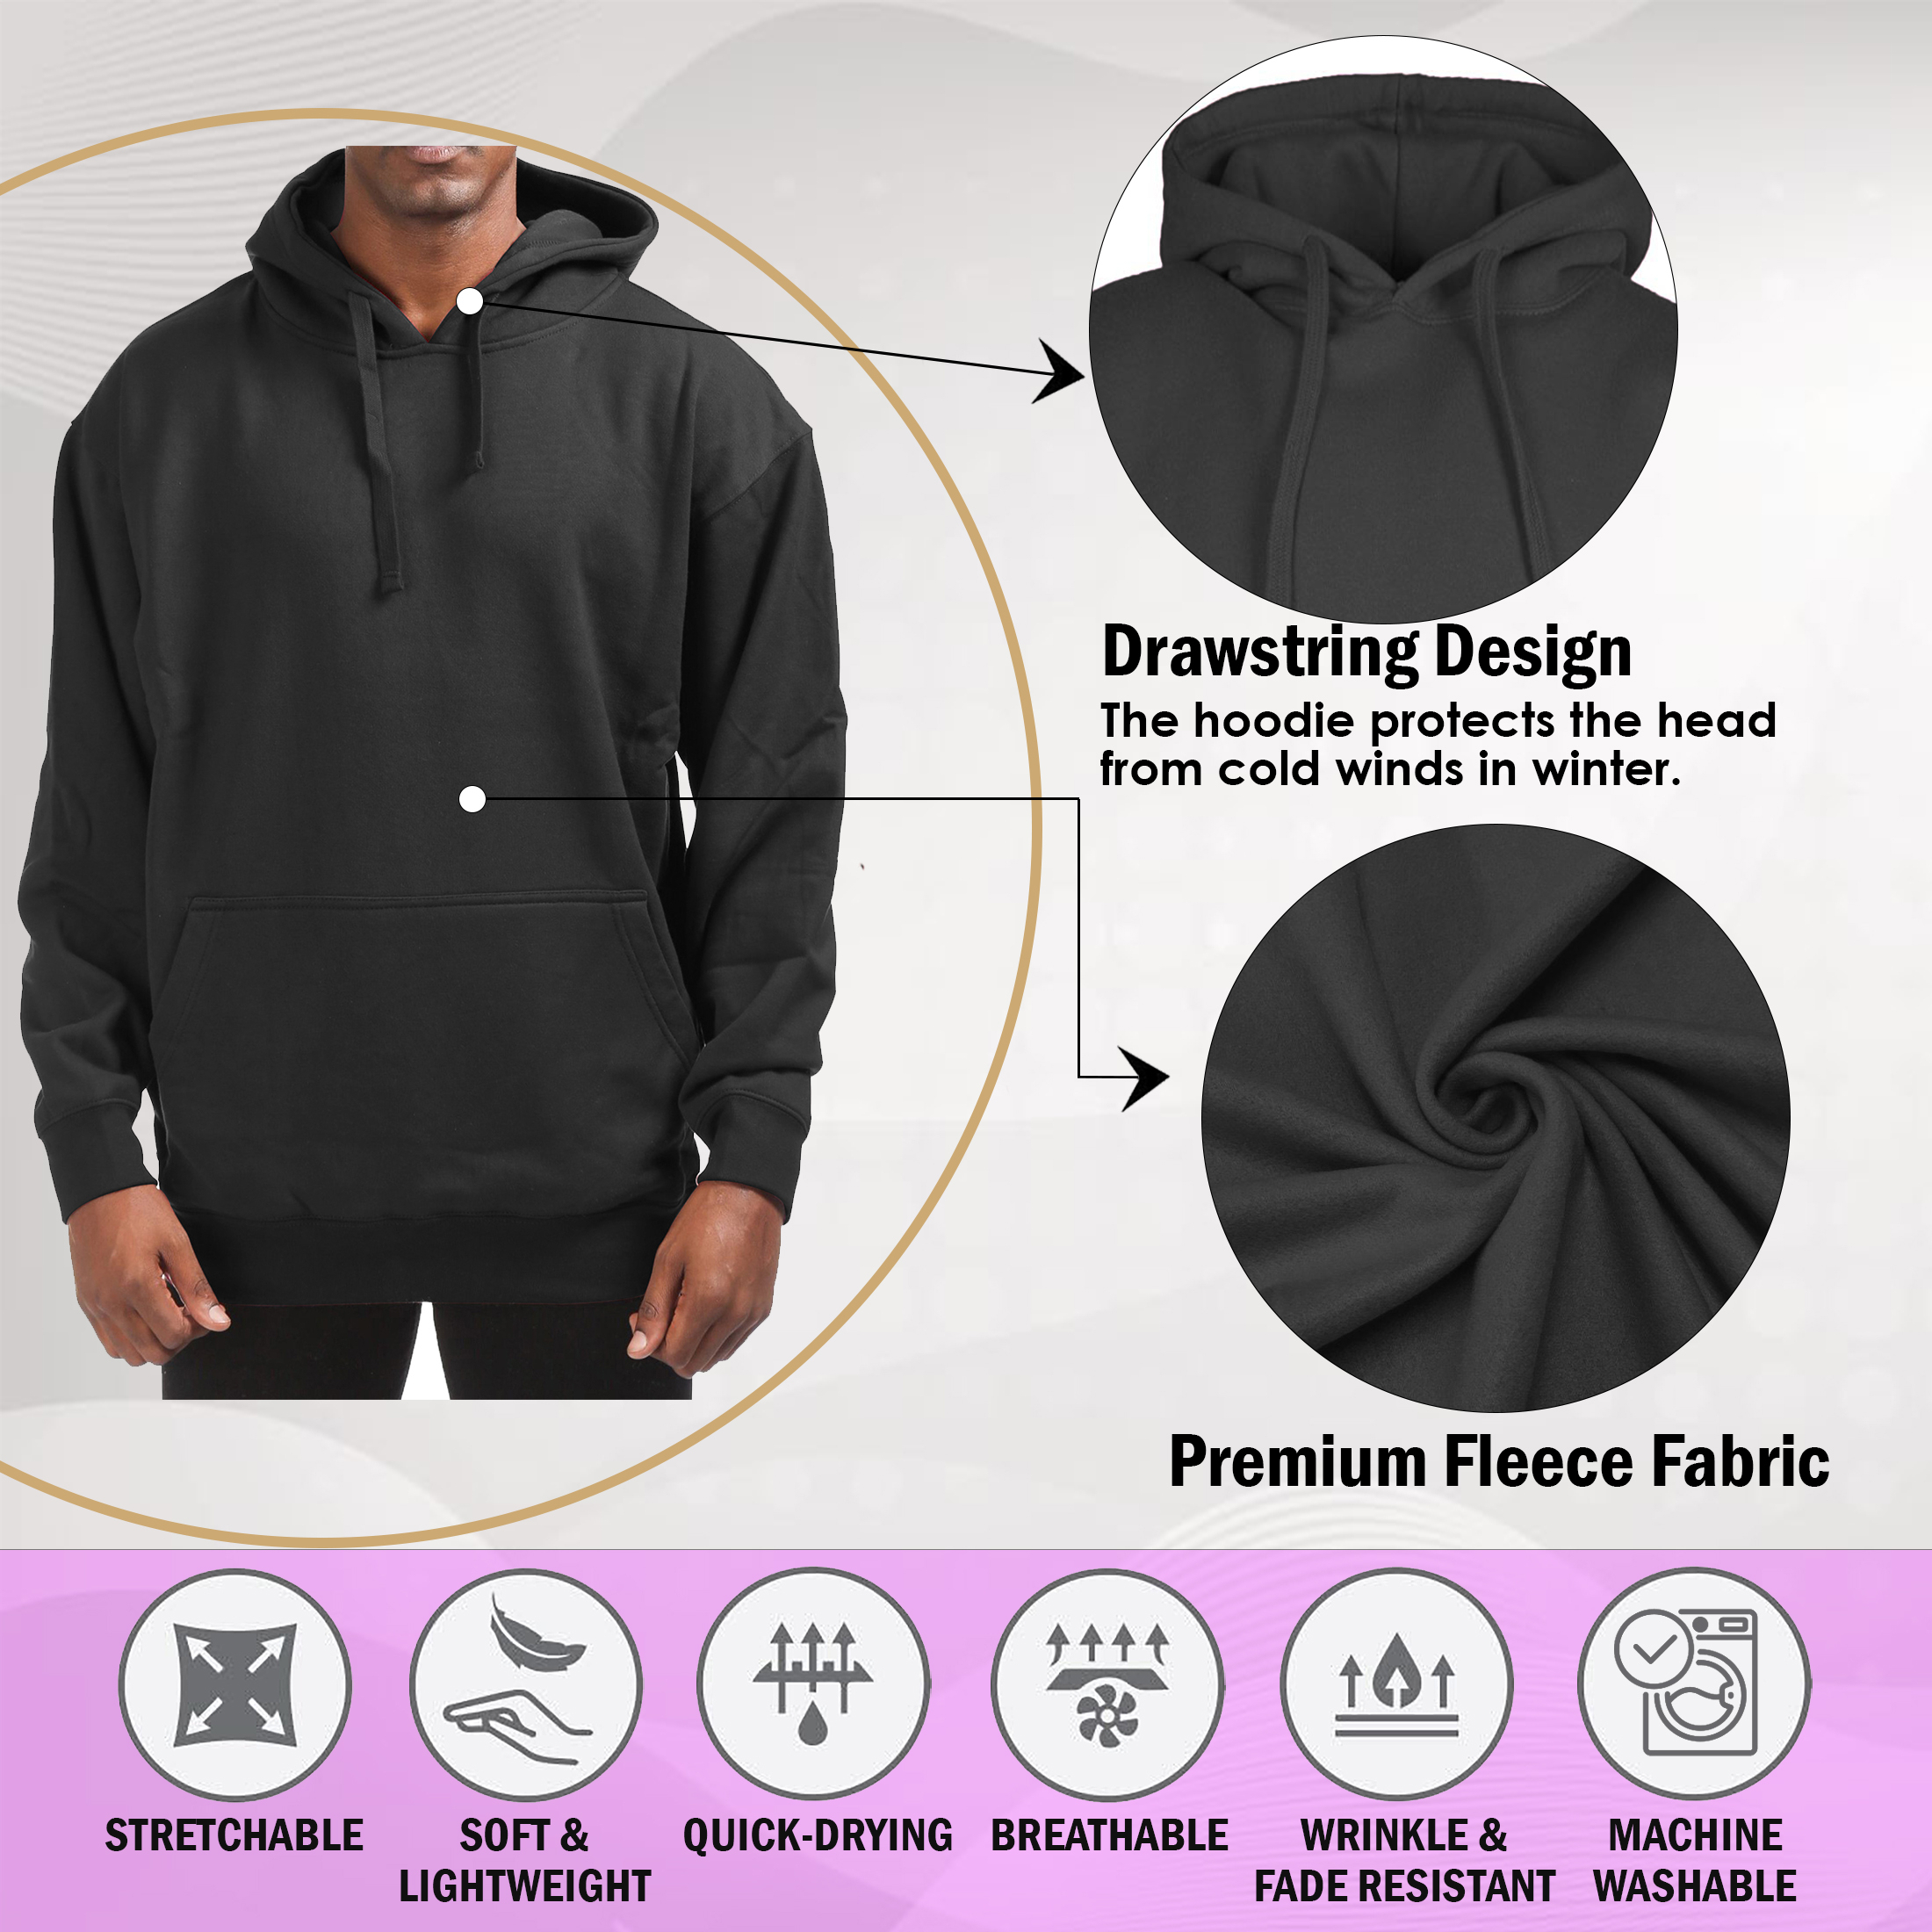 Men's Cotton-Blend Fleece Pullover Hoodie With Pocket (Big & Tall Sizes Available) - Gray, Medium